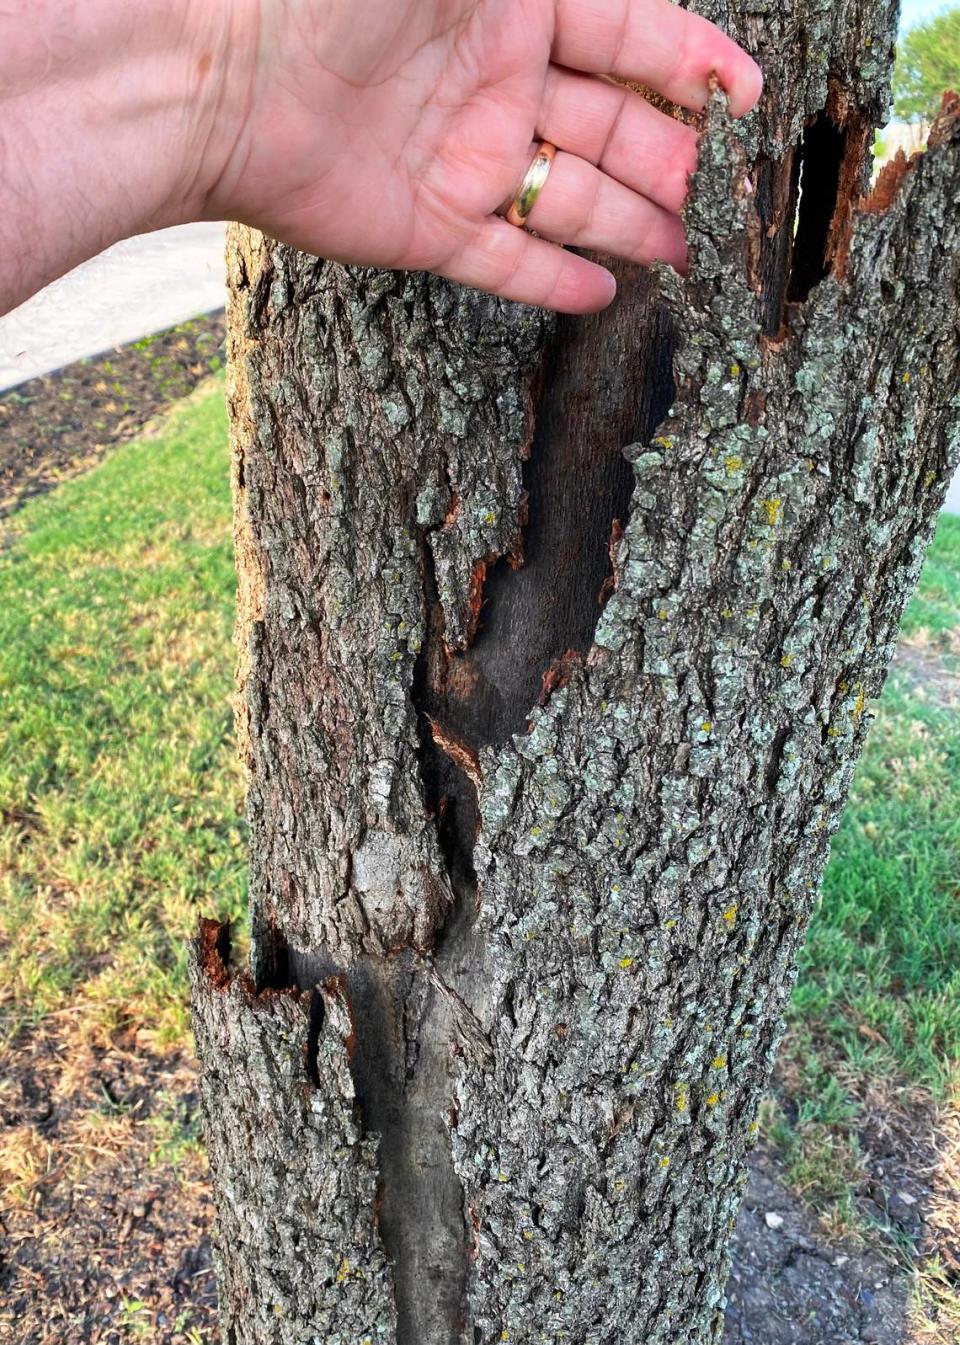 Severe radial “shaking” of the bark of a live oak tree caused by the extreme cold that hit Texas in February 2021.